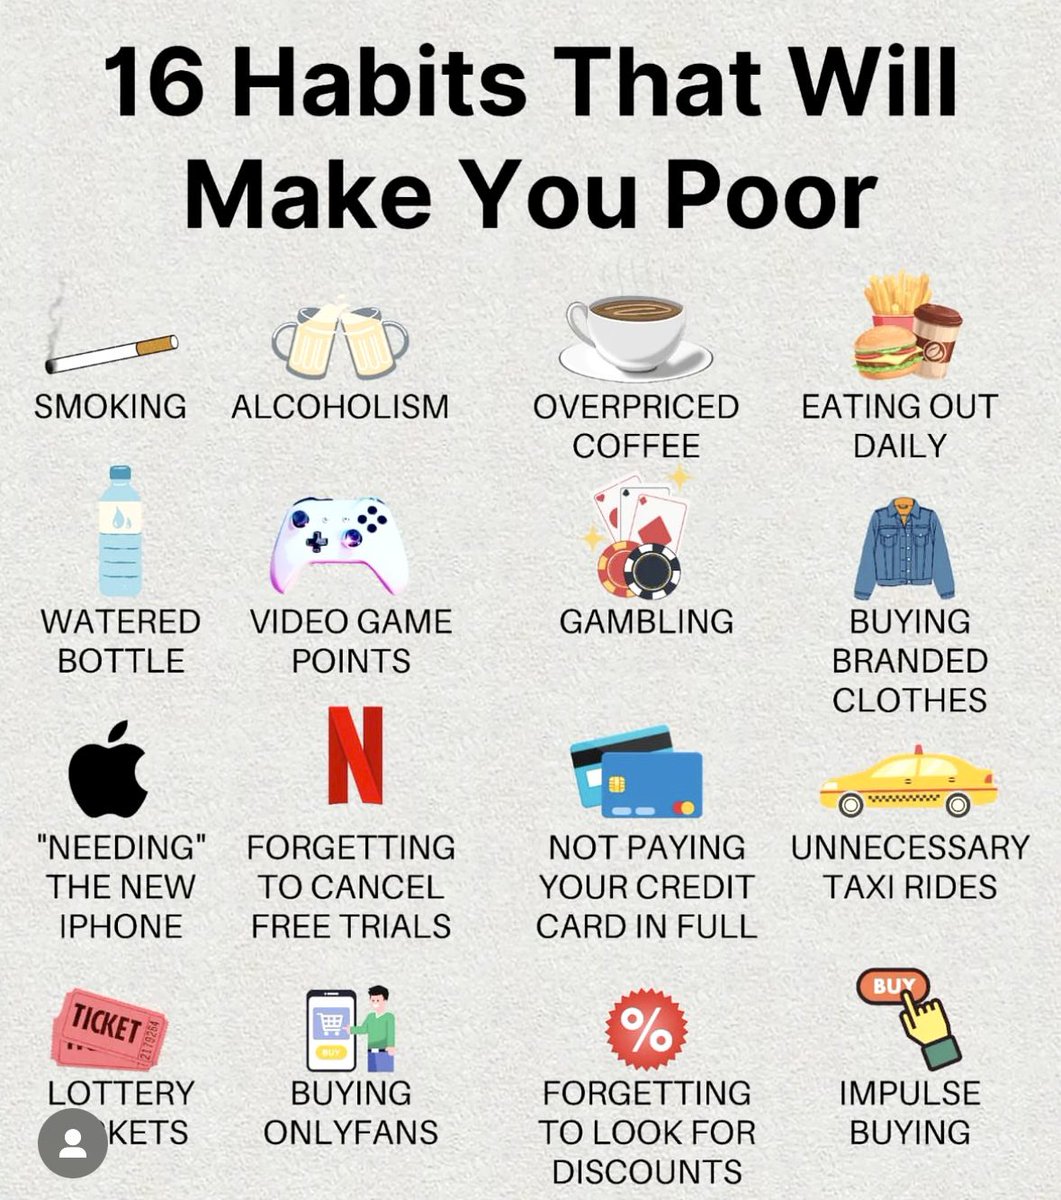 16 Habits That Will Make You Poor: